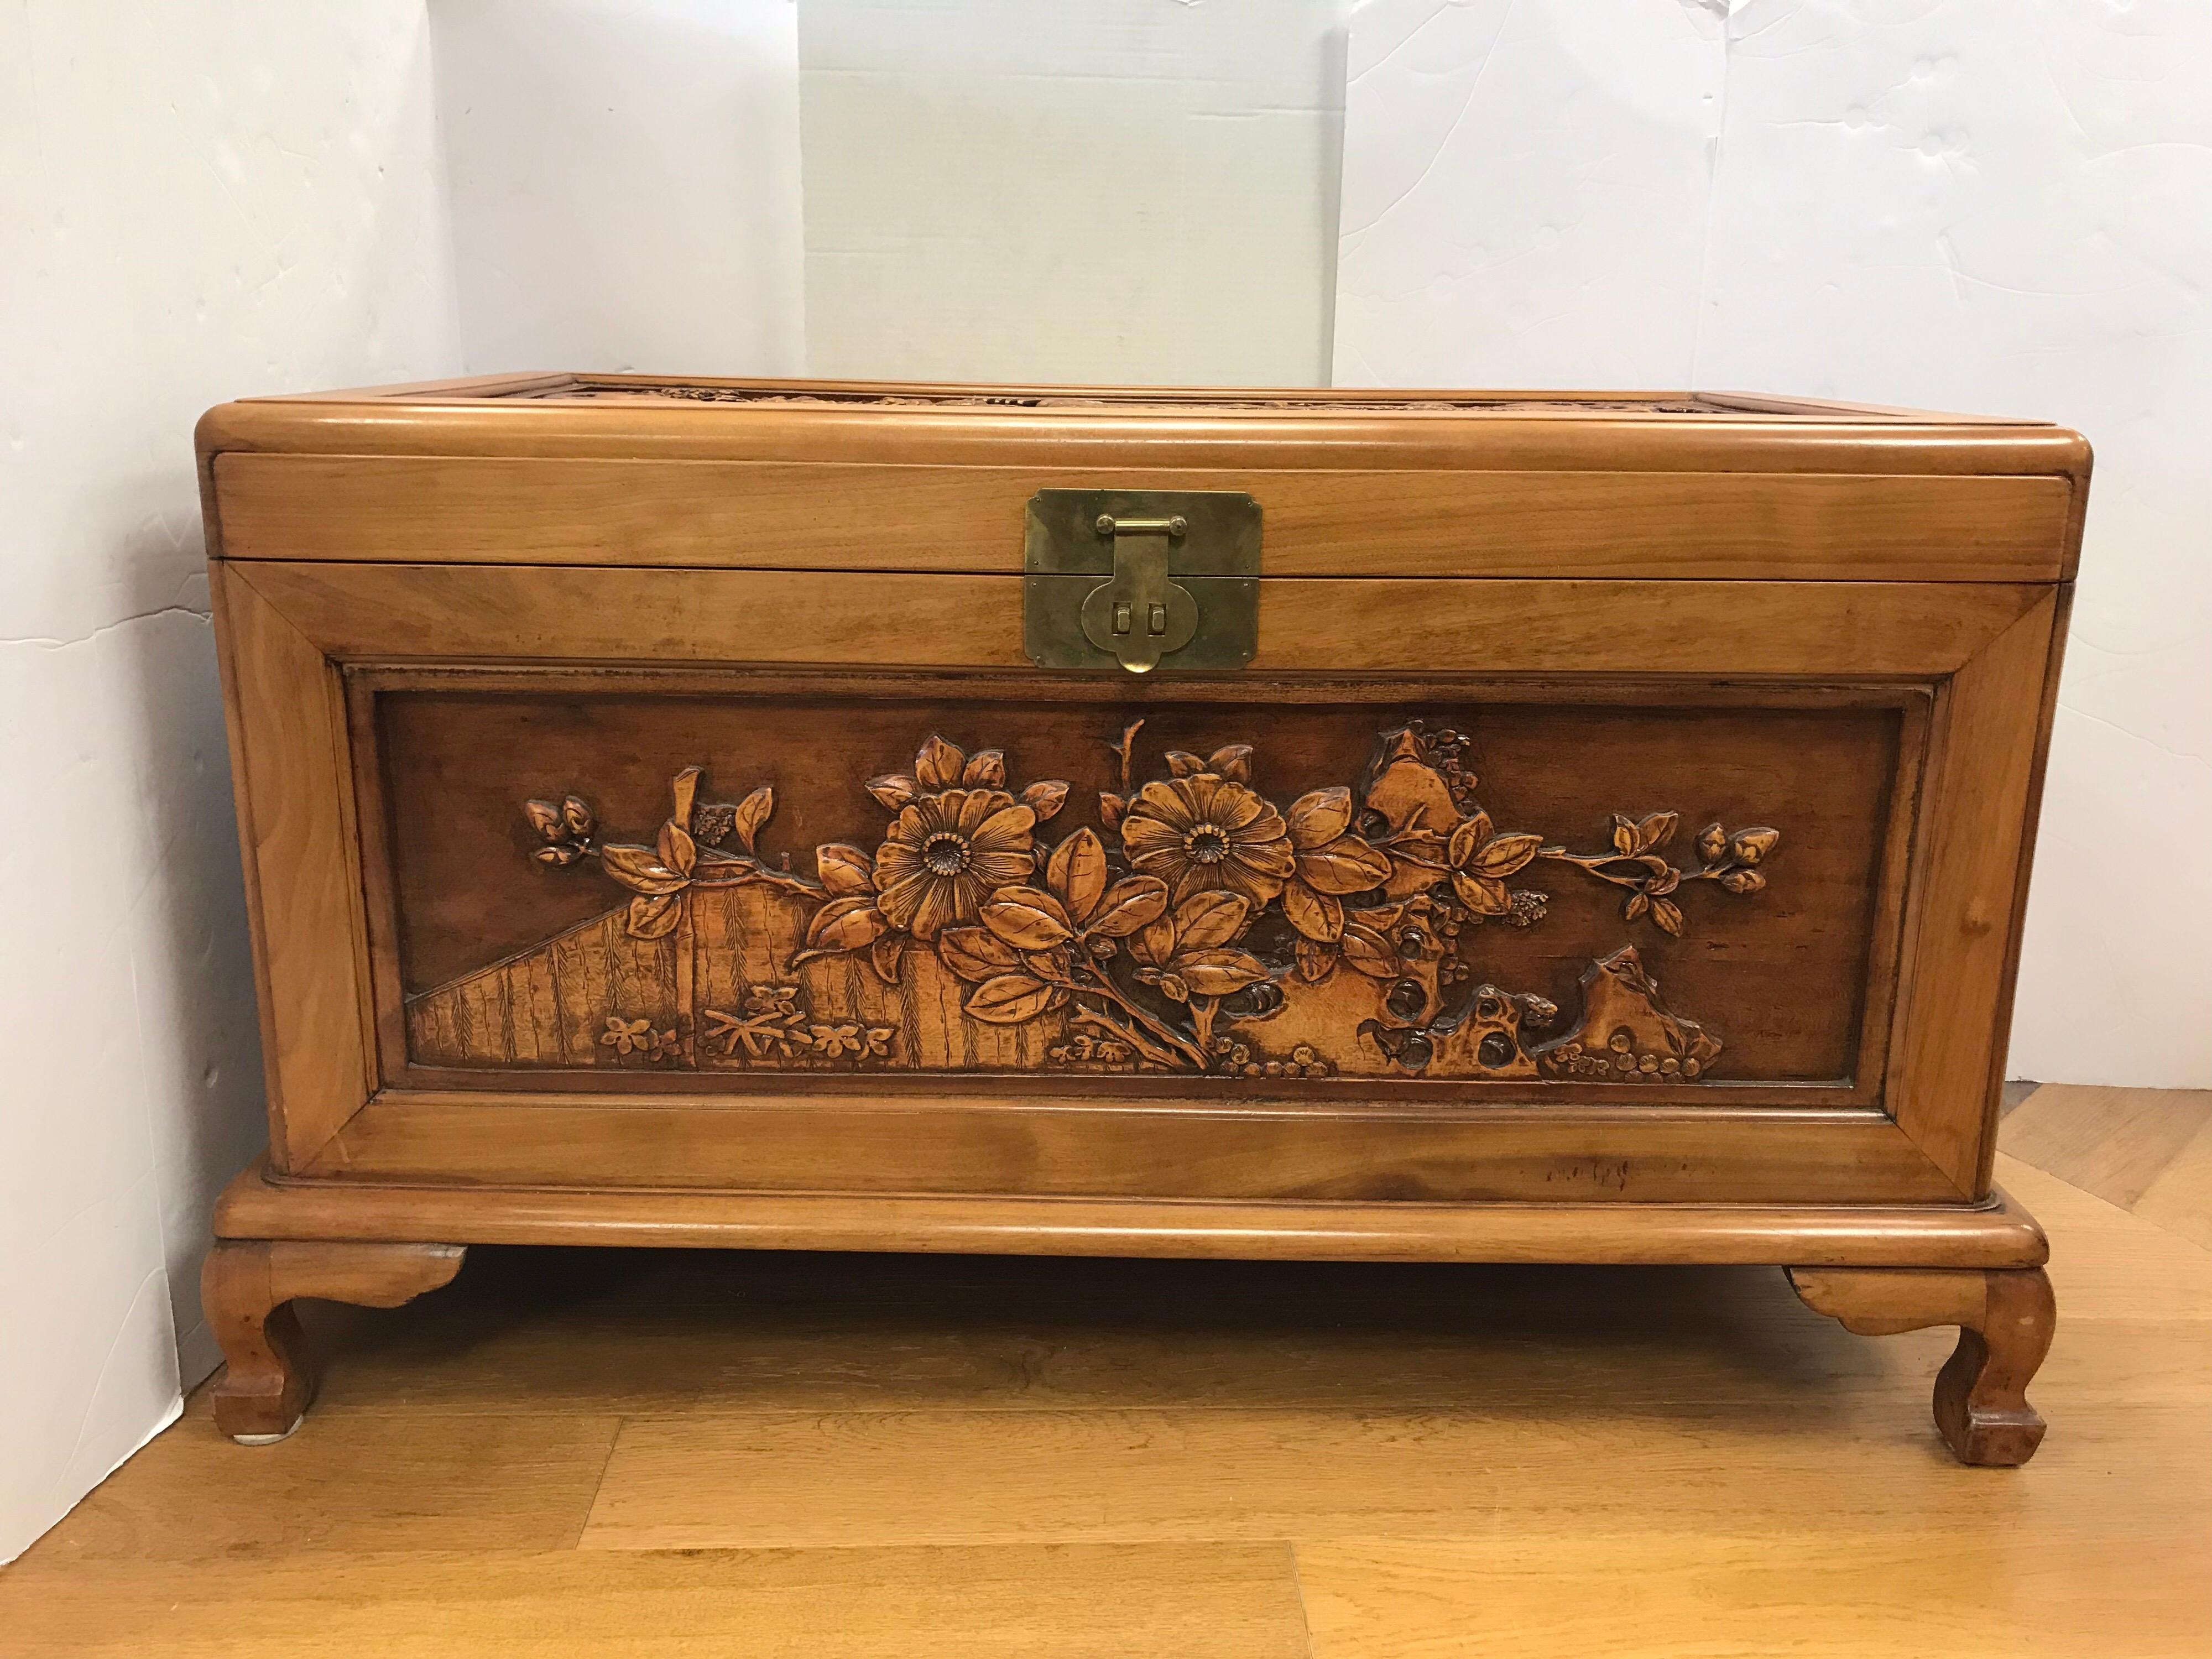 Chinese export trunk features stunning intricate carved scenery of birds and flowers. The different layers of carvings give it a three dimensional effect. Carvings are on front, back, sides and top. Brass closure opens to cedar interior. Use for